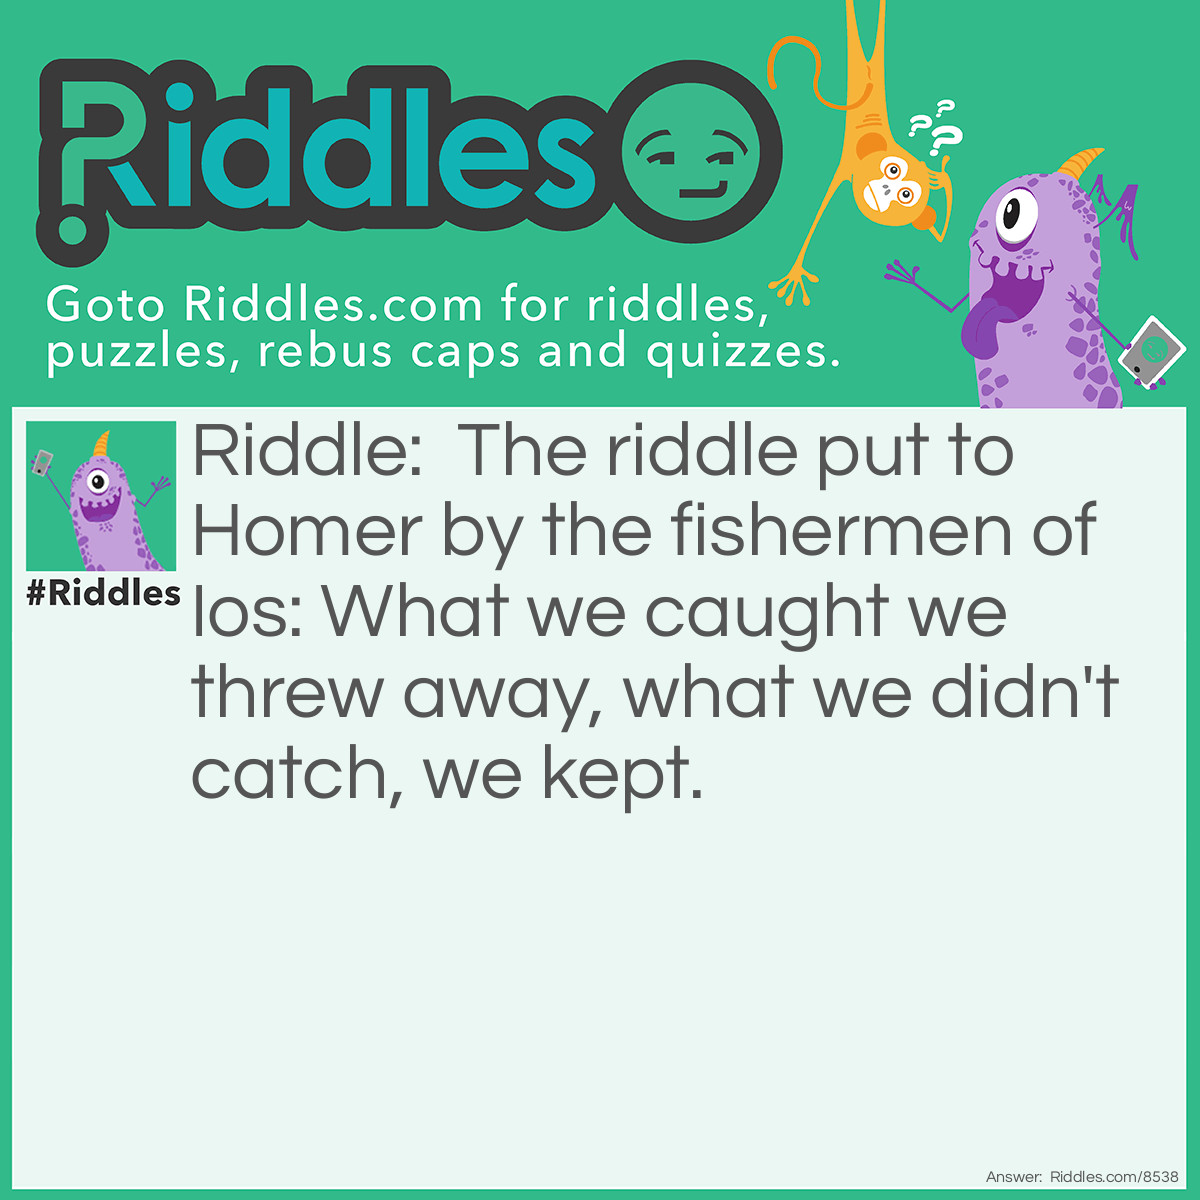 Riddle: The riddle put to Homer by the fishermen of Ios: What we caught we threw away, what we didn't catch, we kept. Answer: The fishermen had lice. Found in The Pocket Dangerous Book for Boys